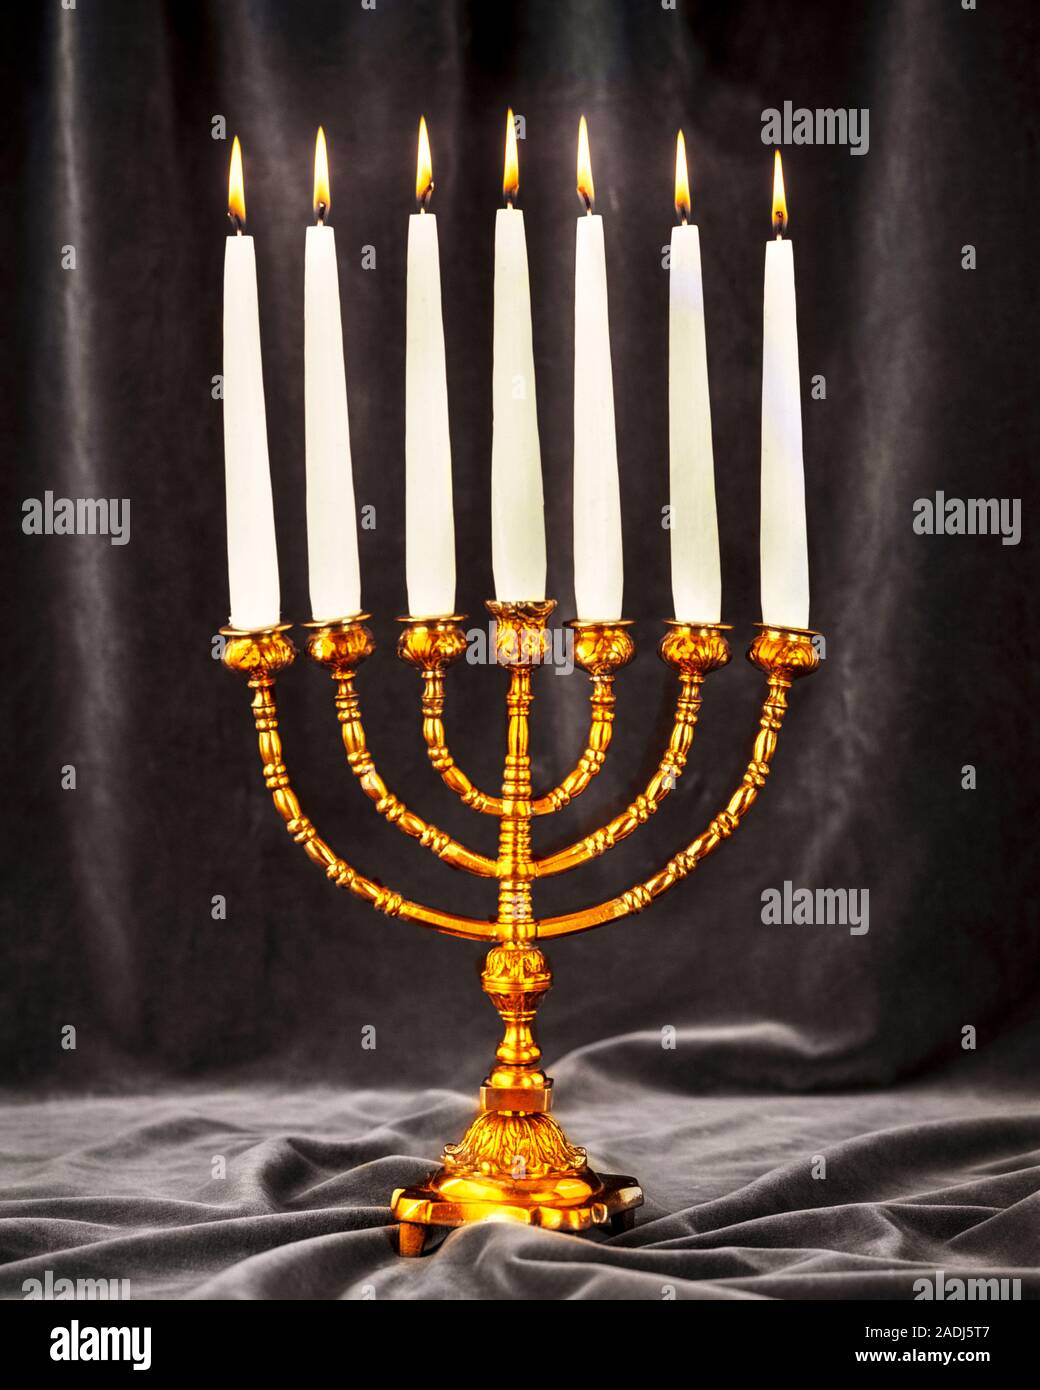 1980s A GOLDEN OR BRASS MENORAH ANCIENT SYMBOL OF JEWISH FAITH WITH 7 BRANCHES AND CANDLES - kr29439 PHT001 HARS OLD FASHIONED REPRESENTATION Stock Photo